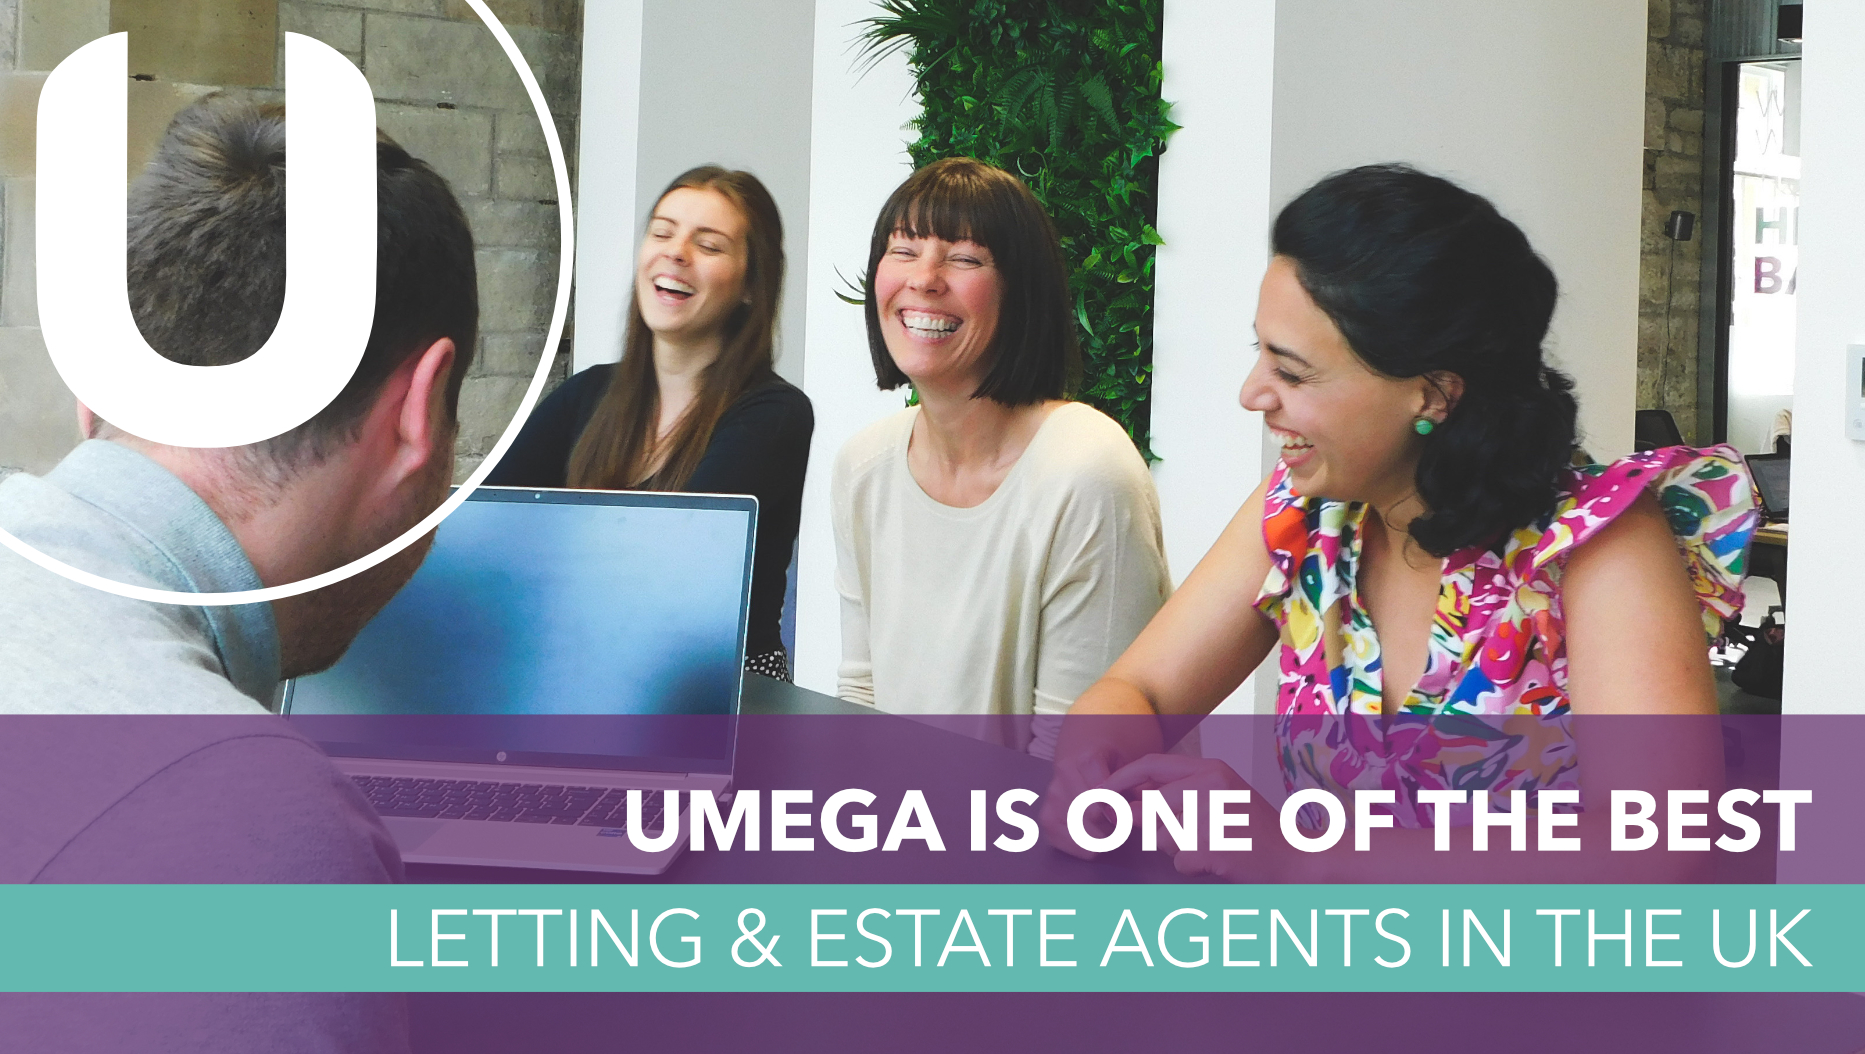 Umega is one of the best Letting and Estate Agents in the UK